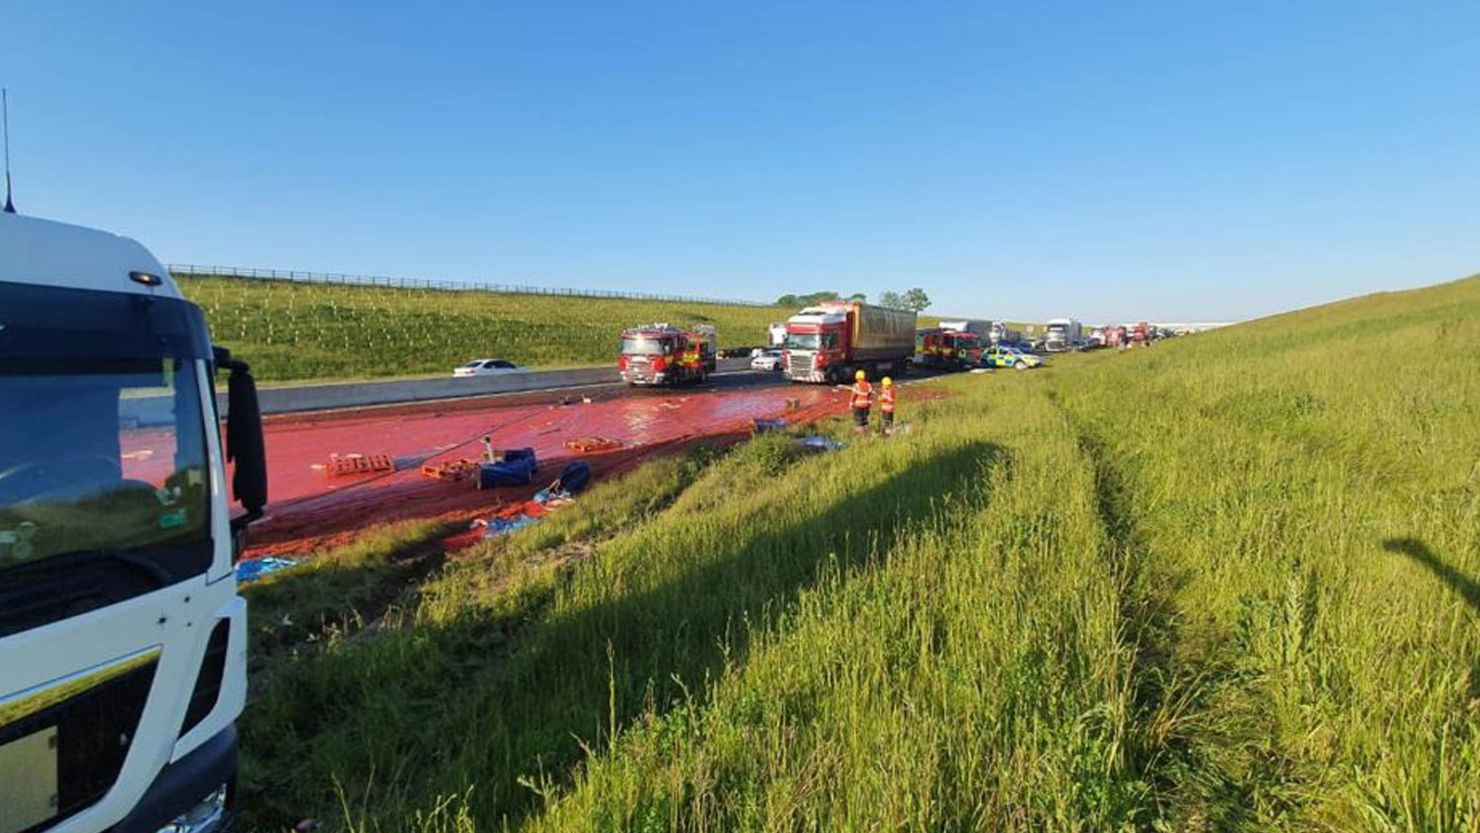 A truck carrying tomato puree crashed in England on Tuesday, spilling its contents and turning the road red.